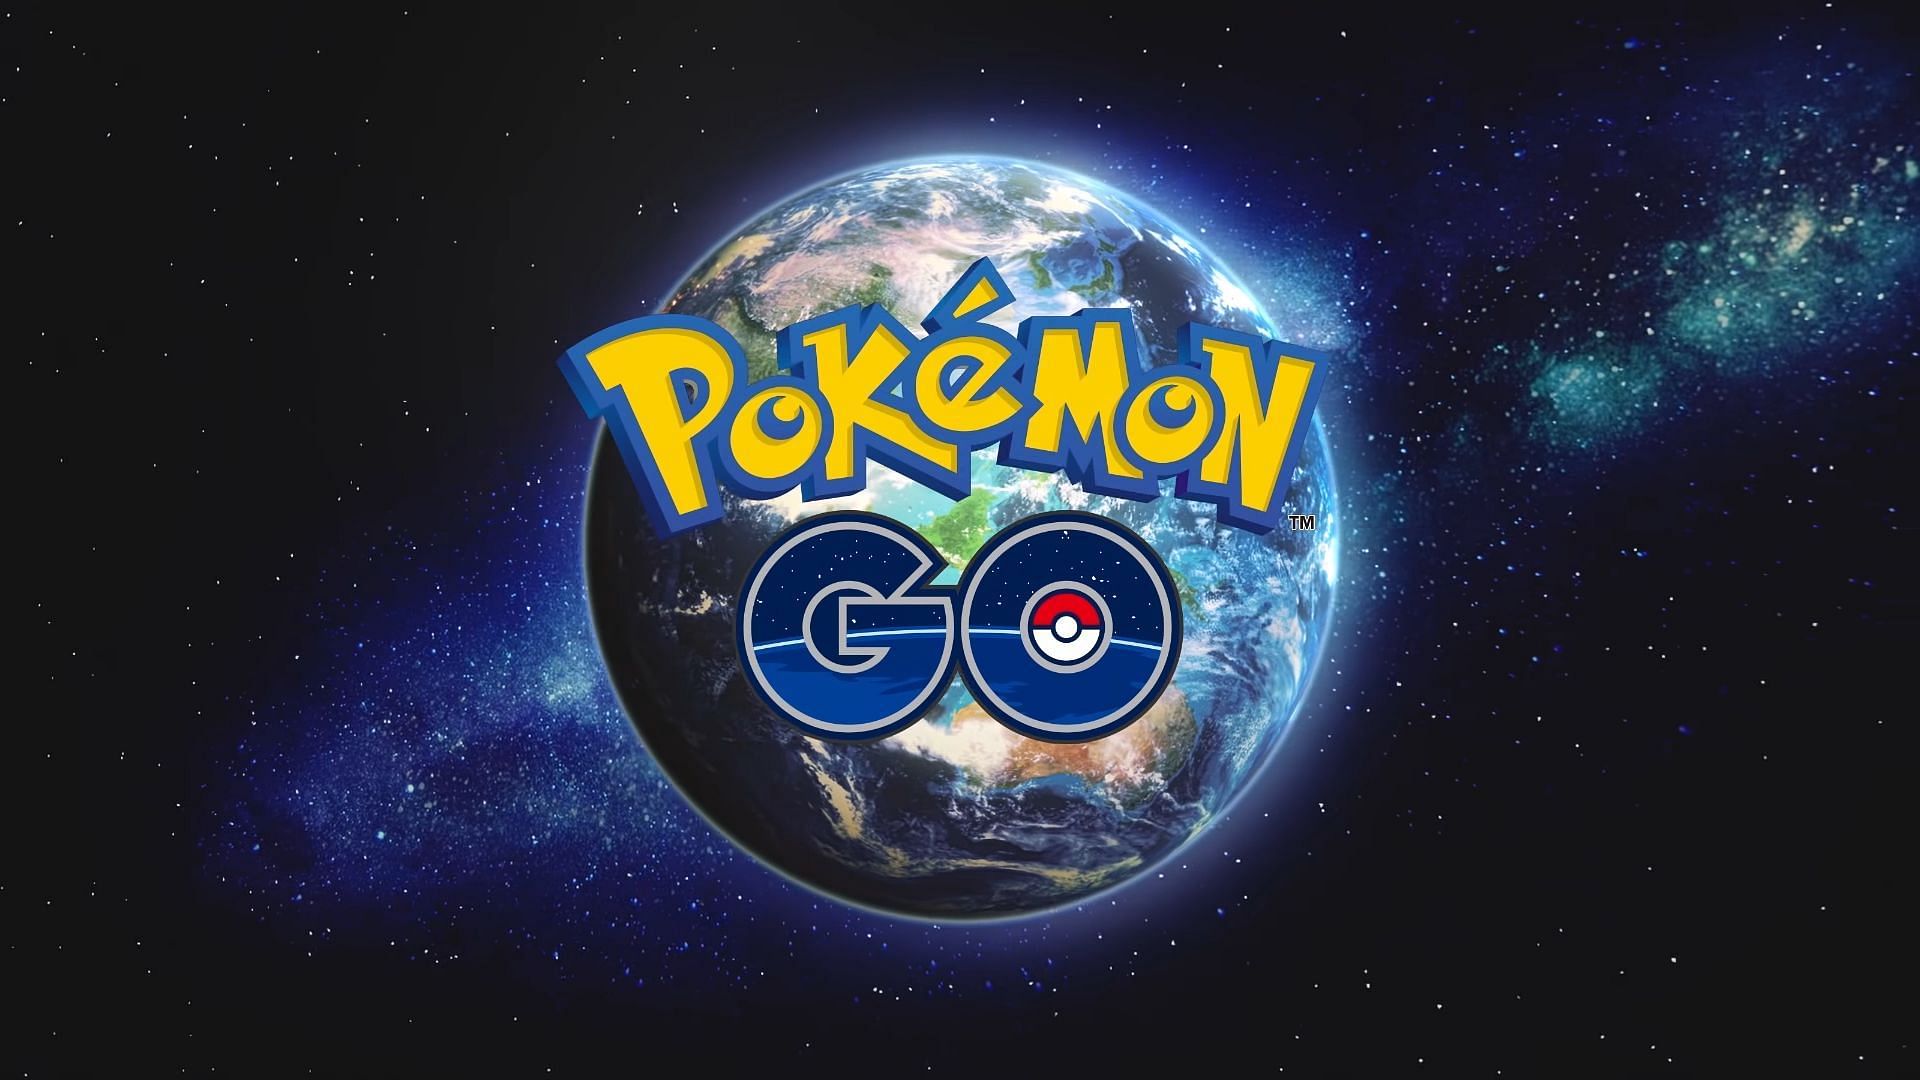 Pokemon GO claims &ldquo;0 XP is an intentional mechanism&rdquo; from Niantic